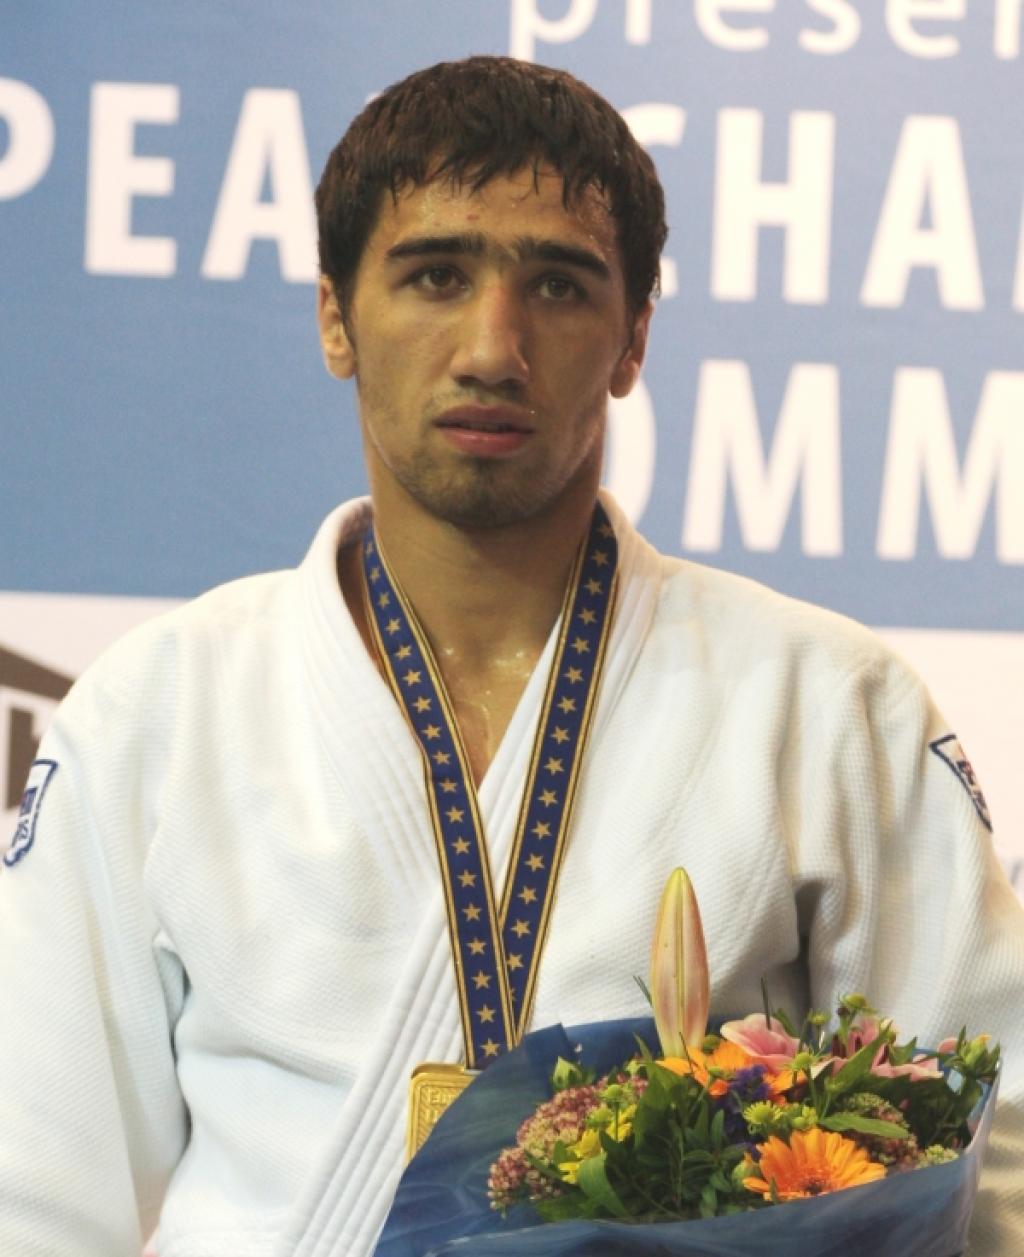 Khalmurzaev defeats Muensterberg and Toth to take the gold for Russia